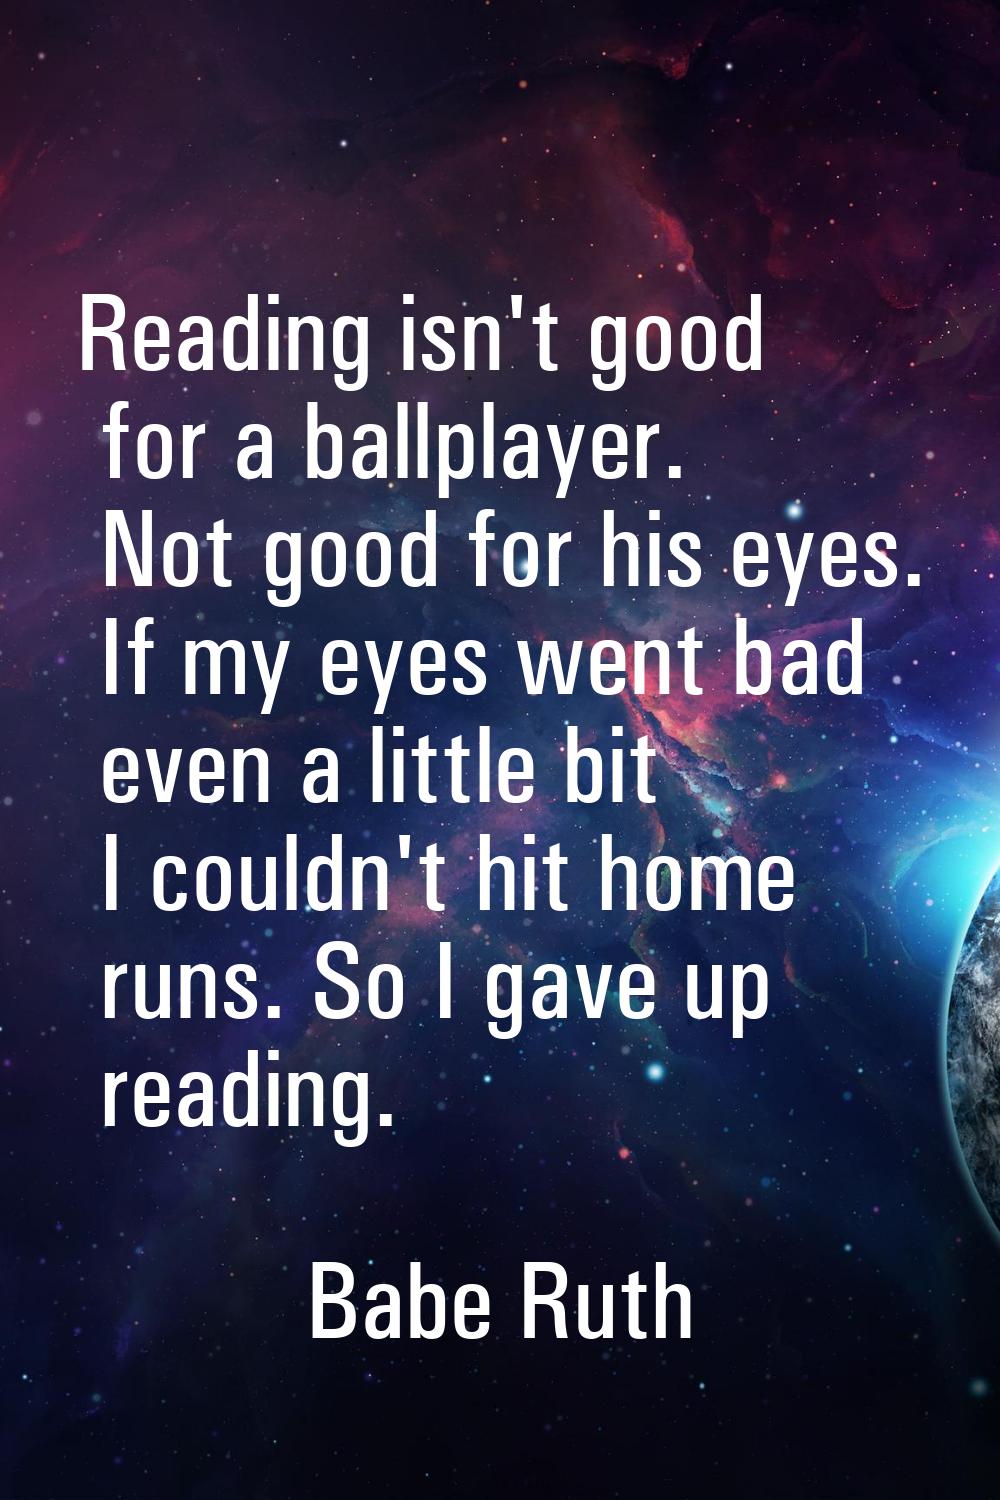 Reading isn't good for a ballplayer. Not good for his eyes. If my eyes went bad even a little bit I